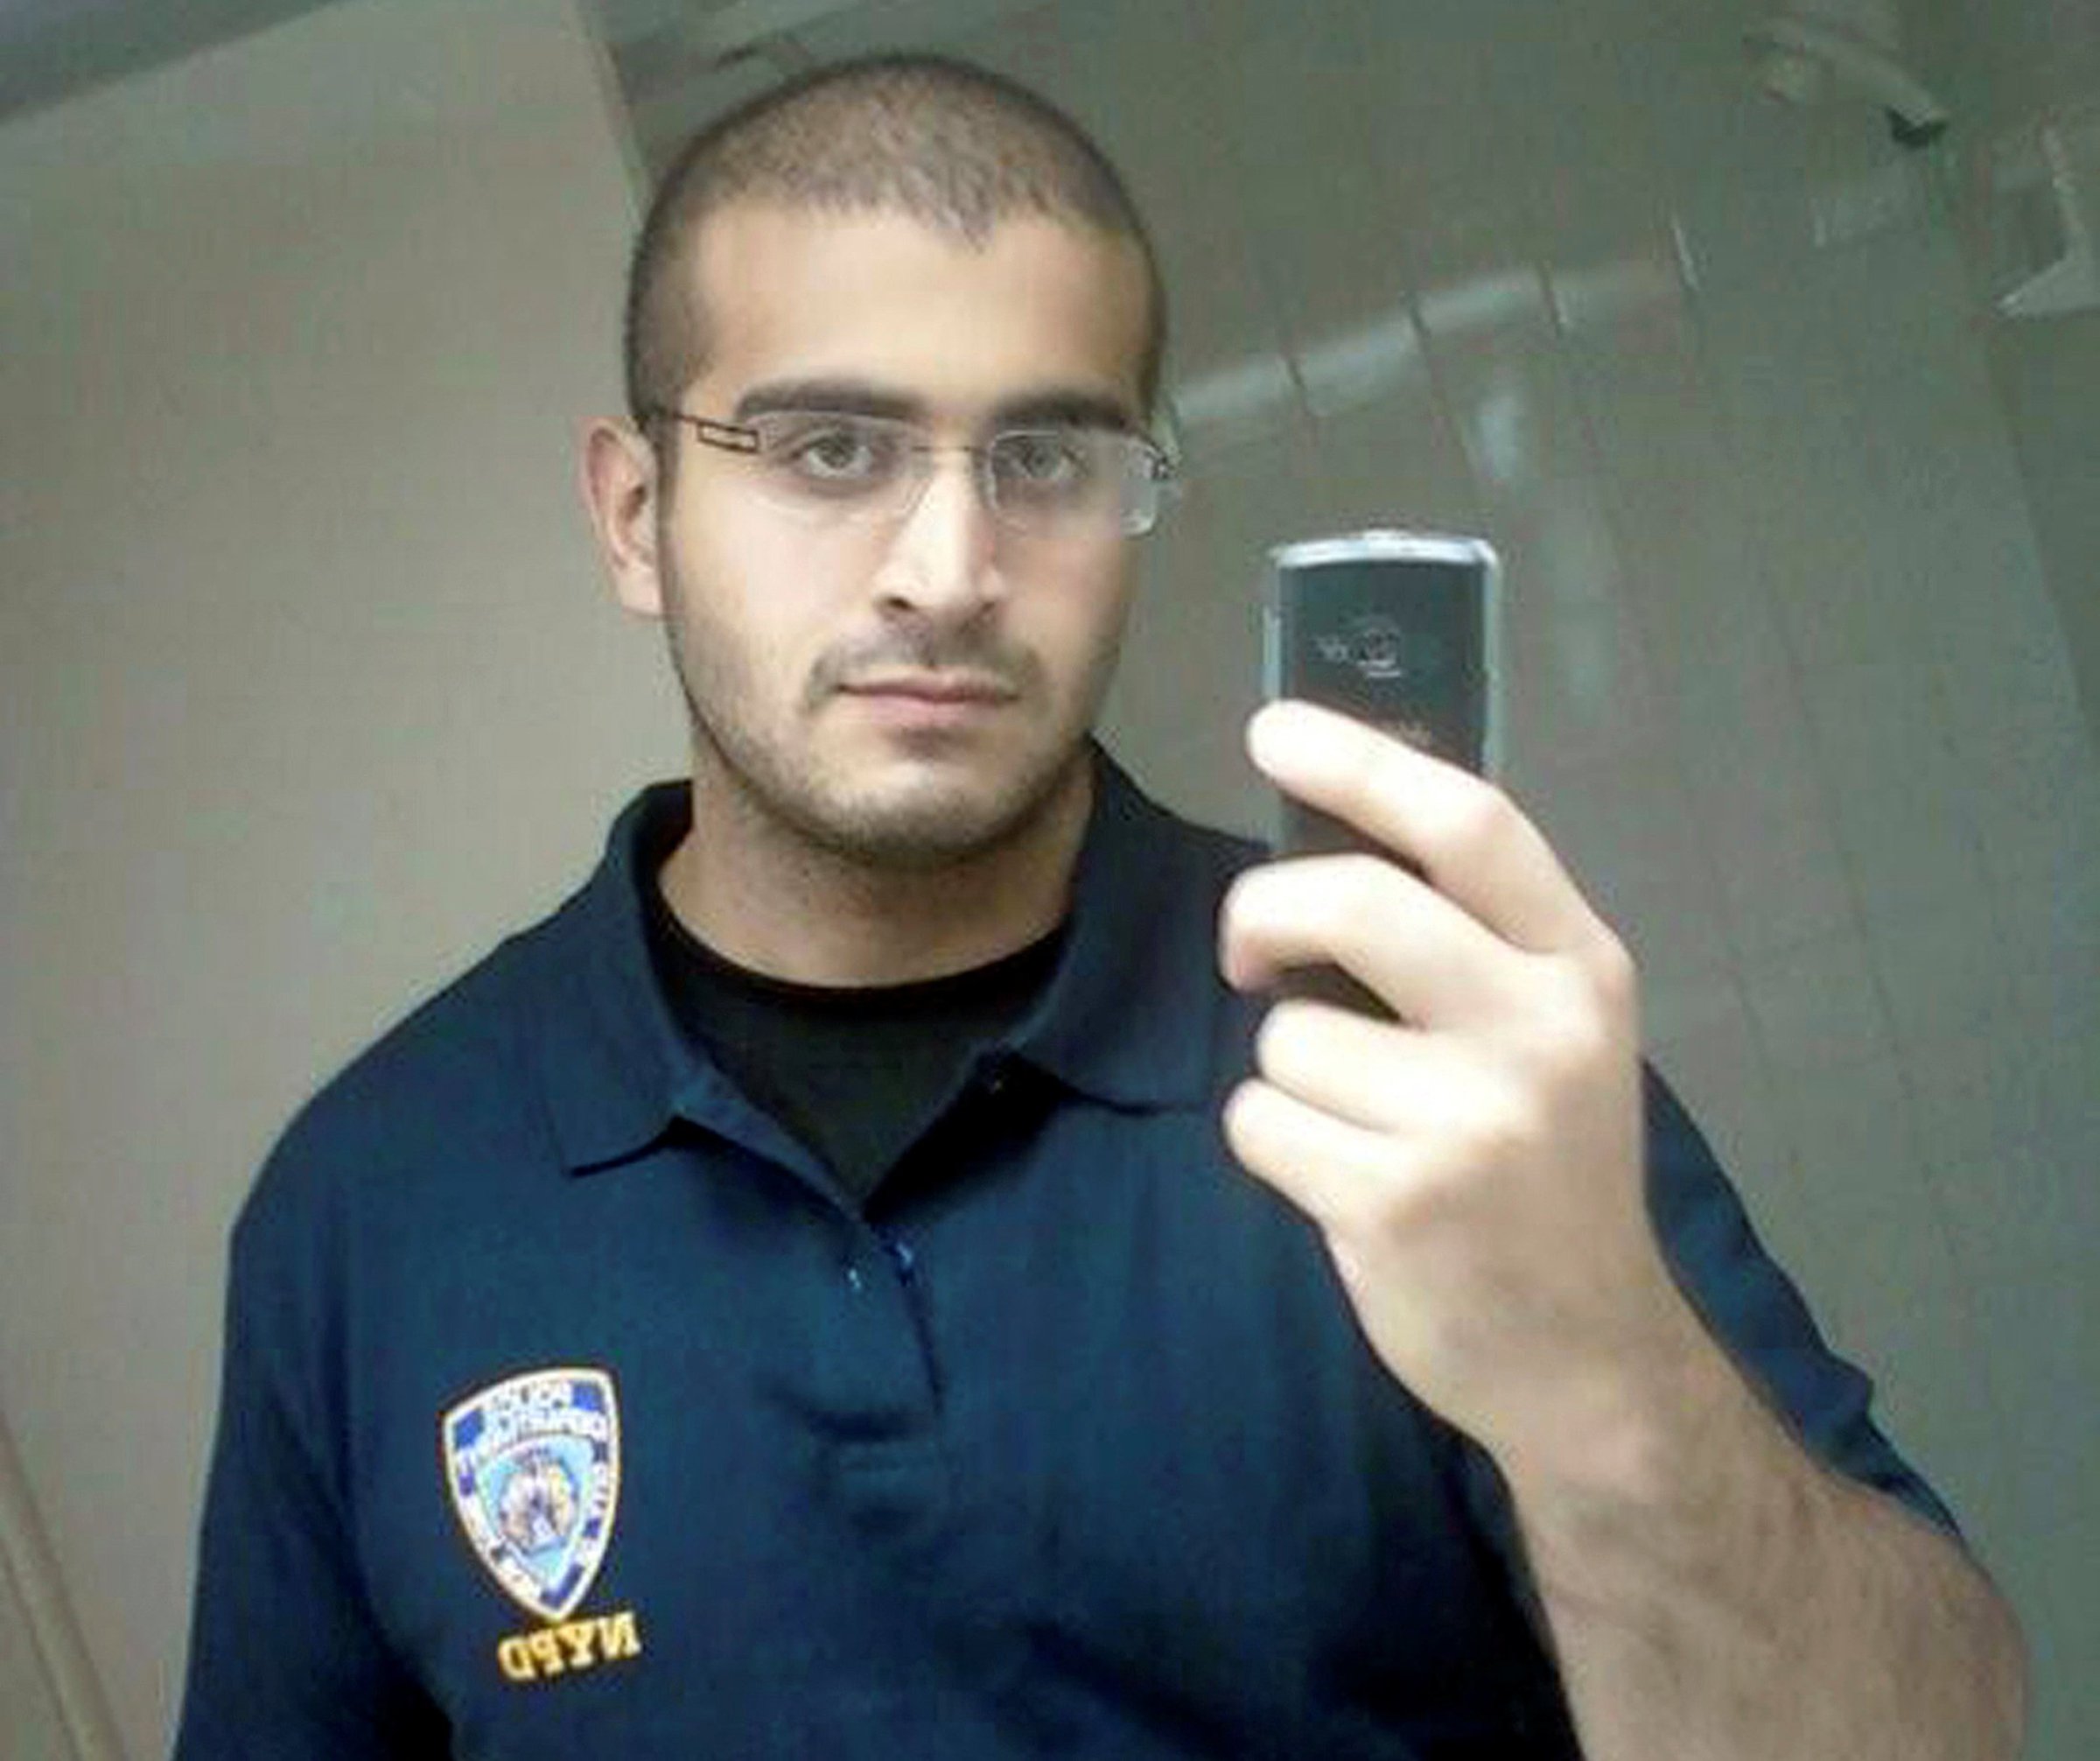 An undated photo from a social media account of Omar Mateen, who Orlando Police have identified as the suspect in the mass shooting at a gay nighclub in Orlando, on June 12, 2016.